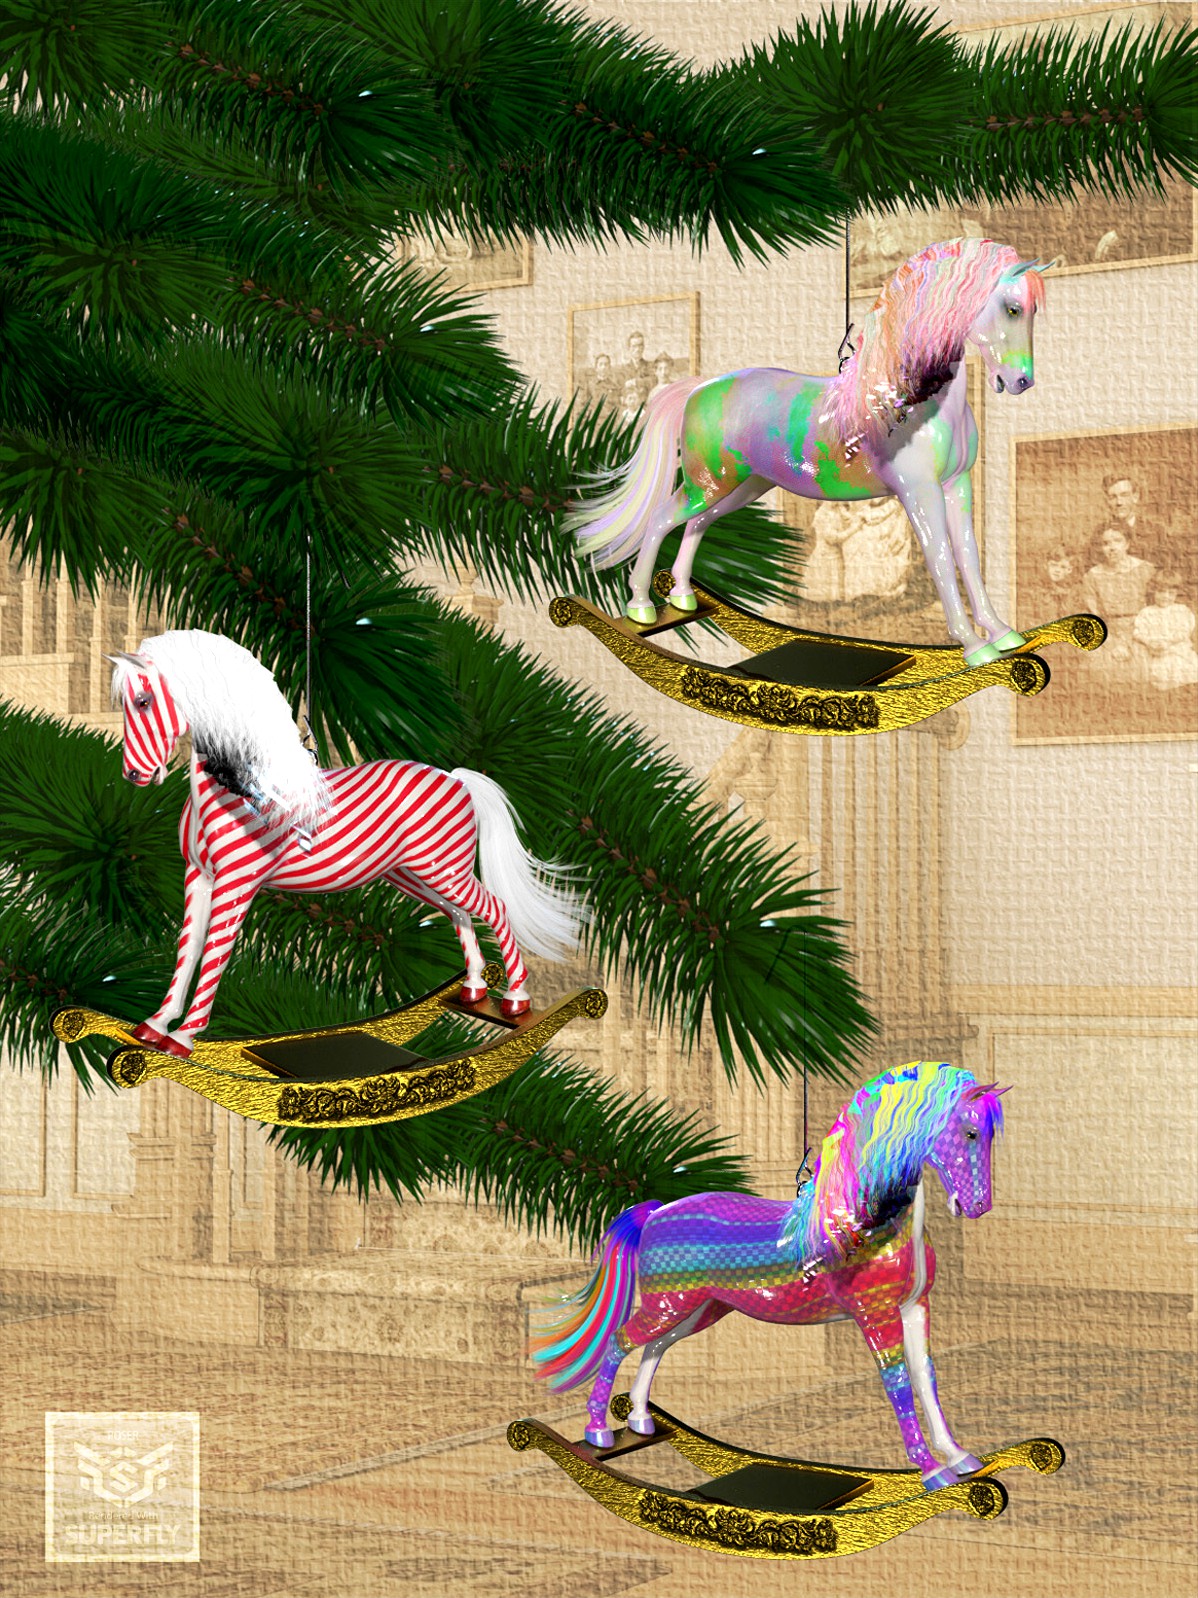 Faery Dreaming-Christmas Candy for Harry, the HiveWire Horse.